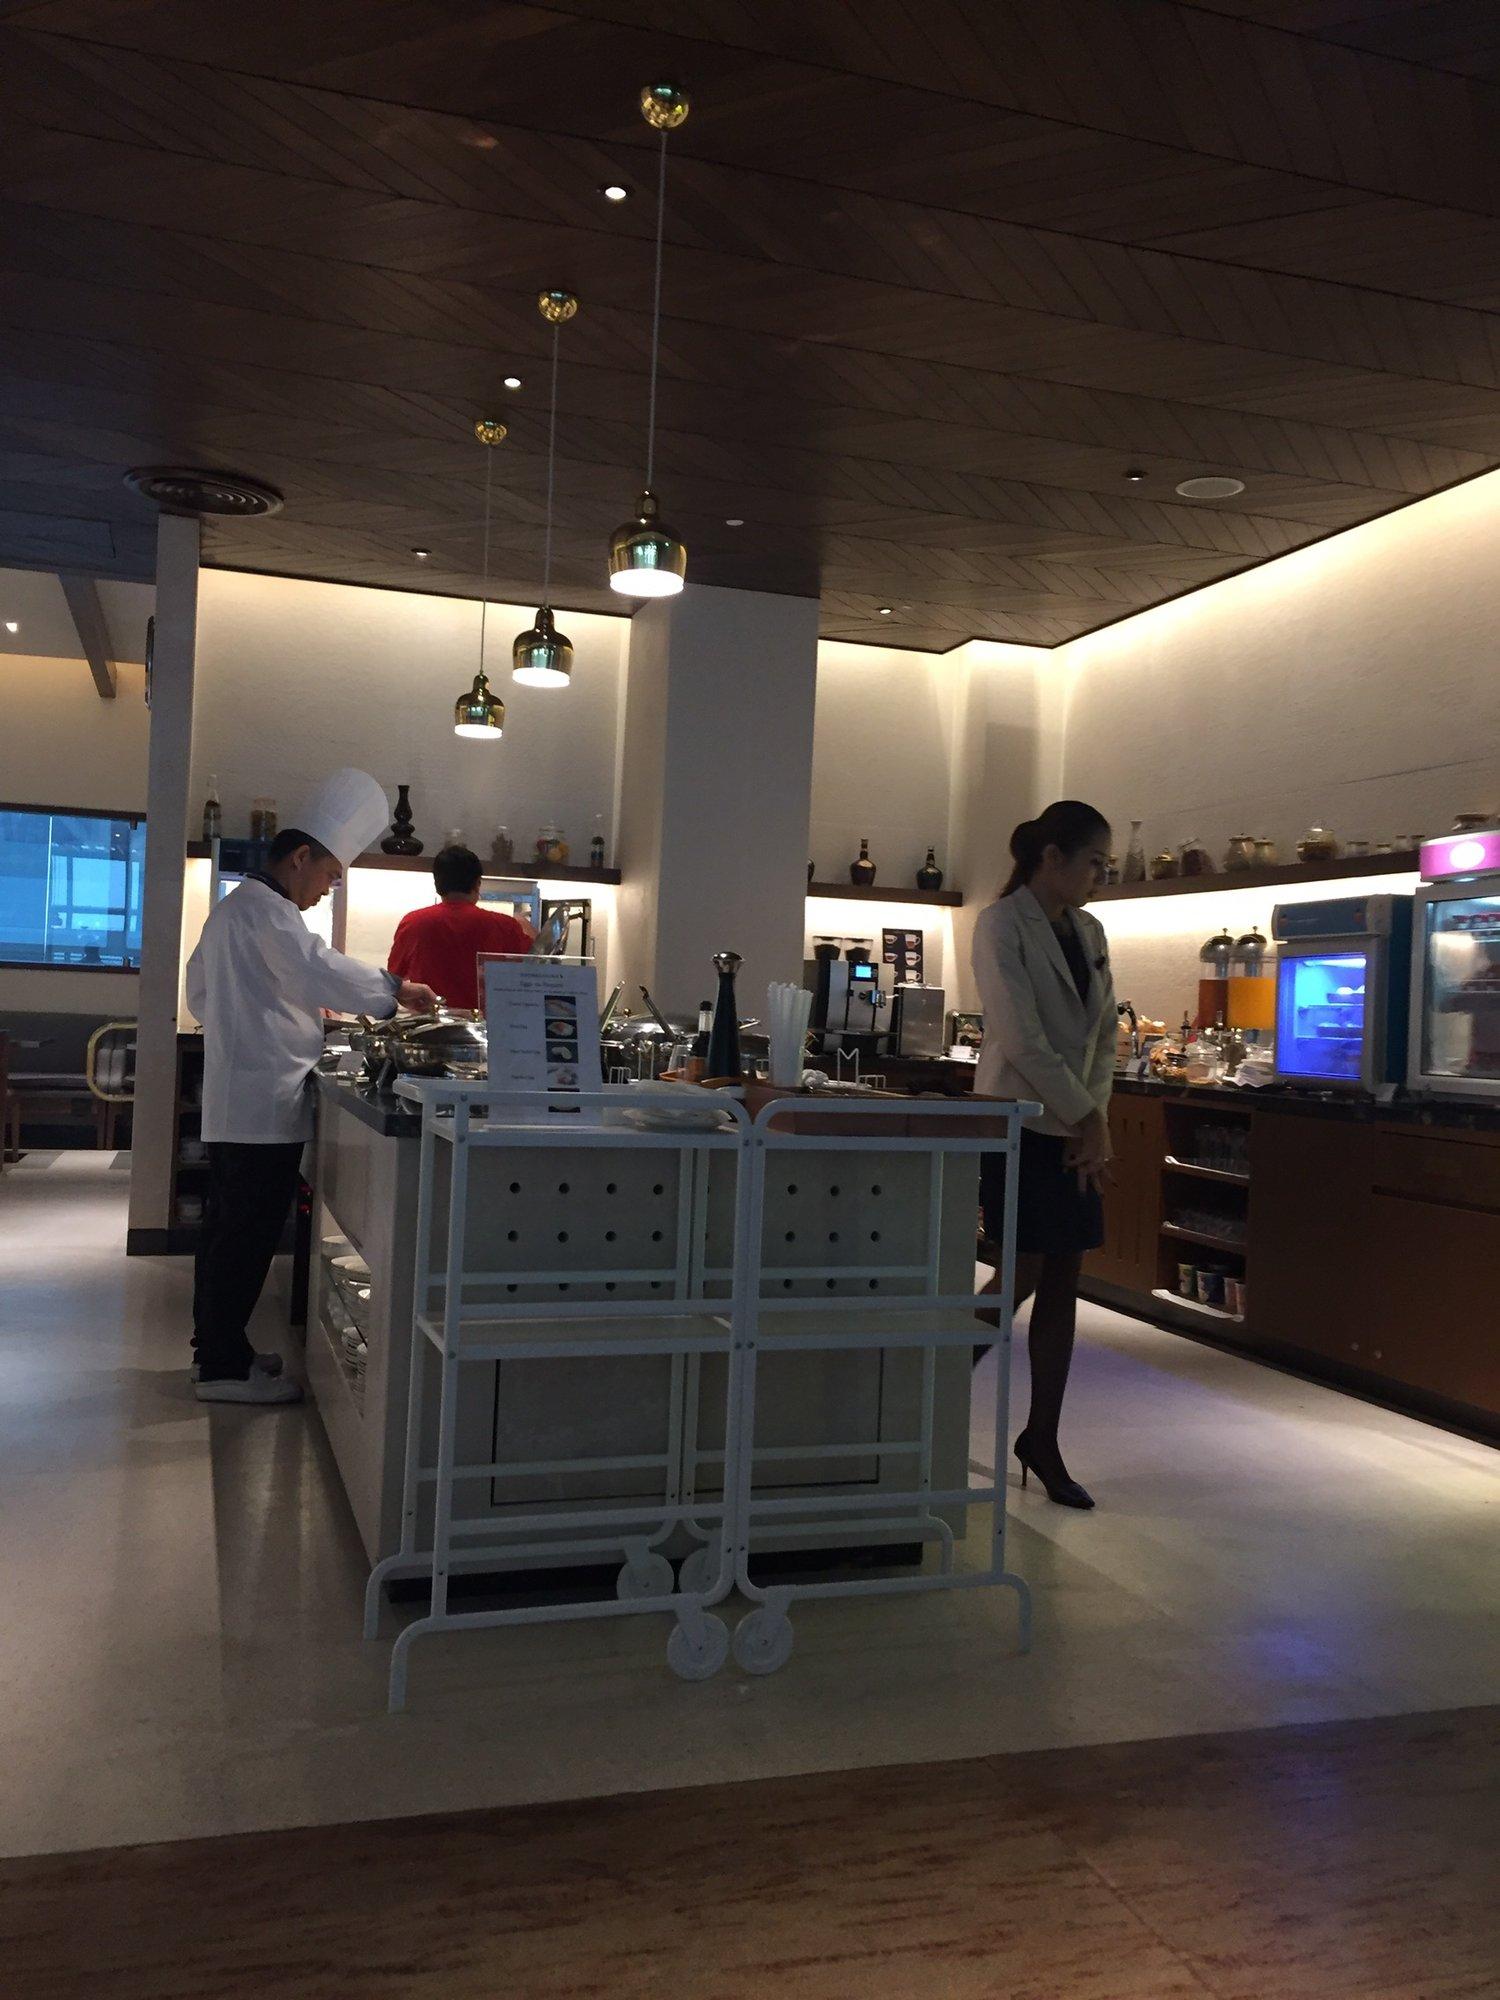 Singapore Airlines SilverKris Business Class Lounge image 13 of 16